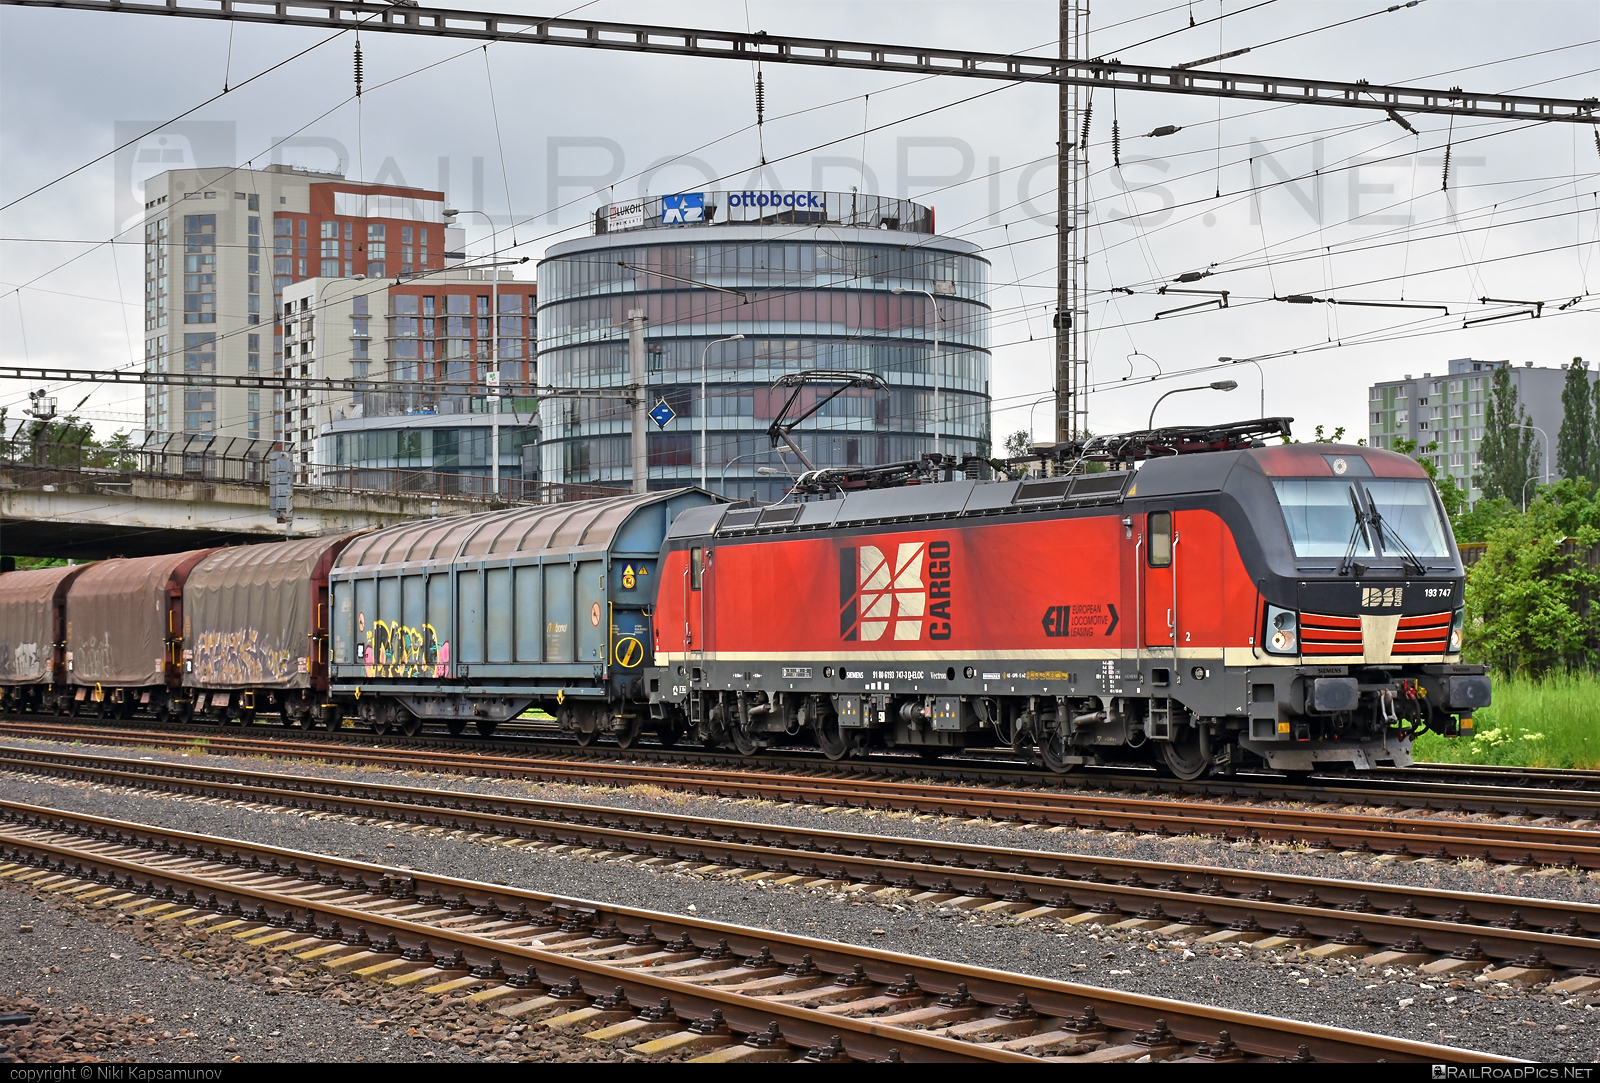 Siemens Vectron MS - 193 747 operated by IDS CARGO a. s. #ell #ellgermany #eloc #europeanlocomotiveleasing #graffiti #idsc #idscargo #siemens #siemensVectron #siemensVectronMS #vectron #vectronMS